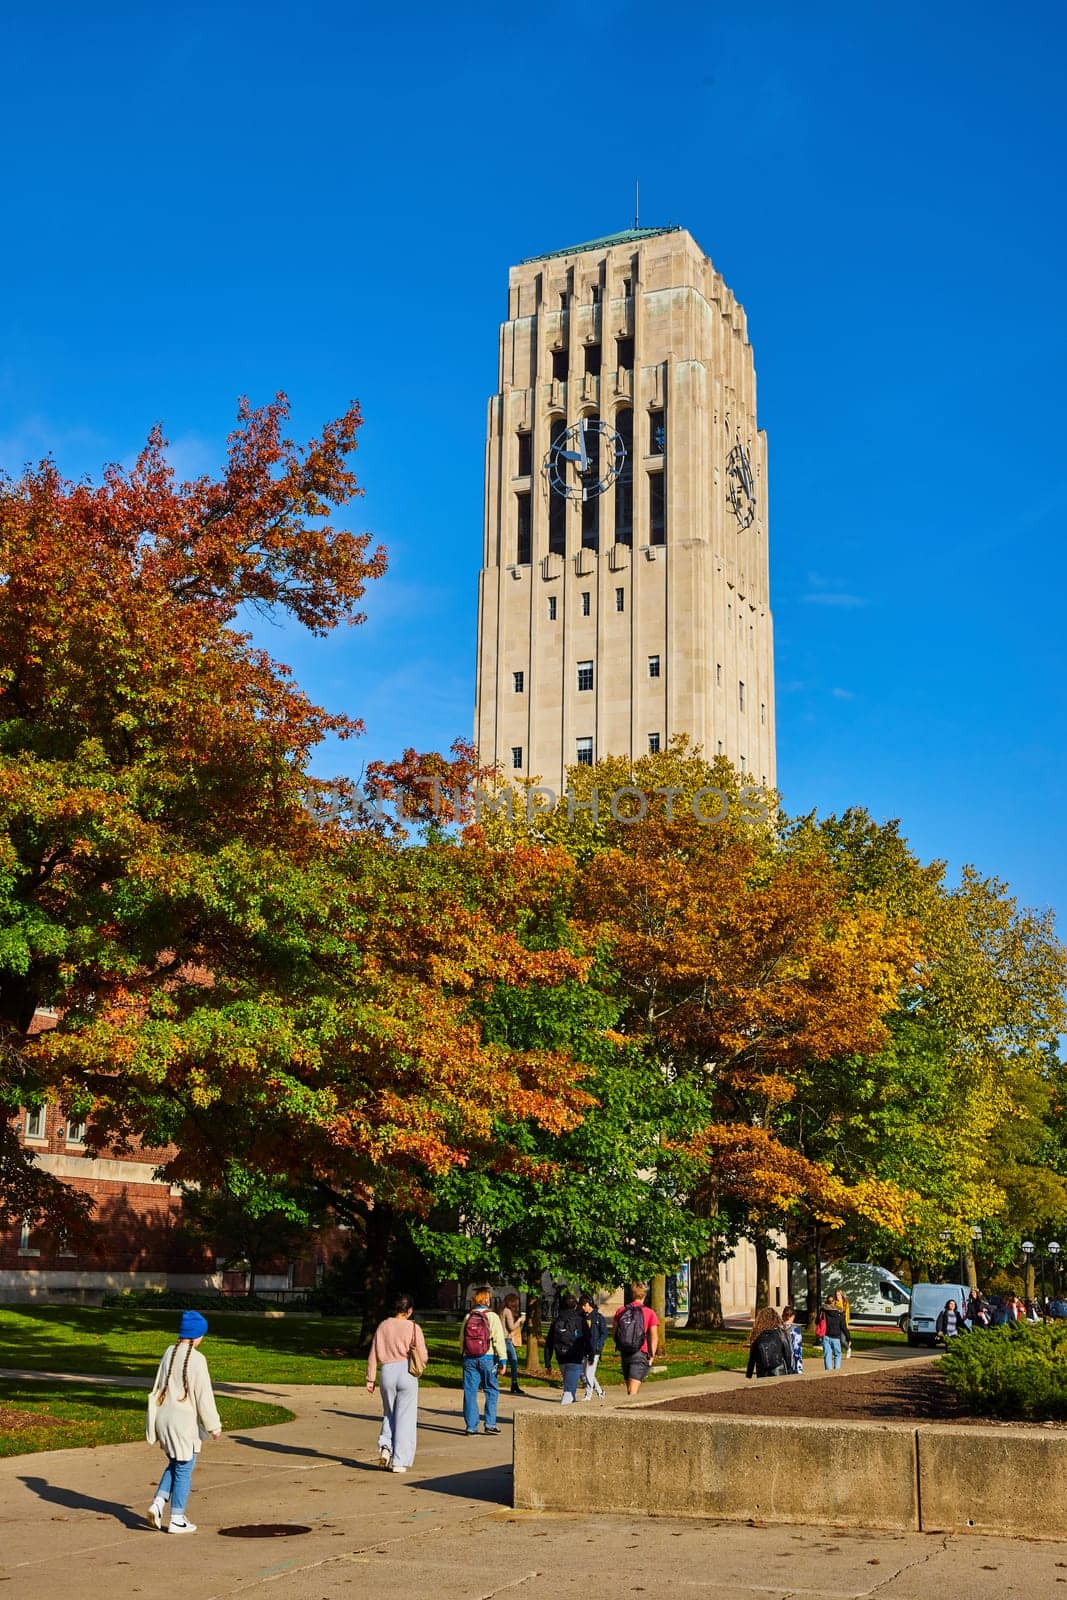 Students stroll under the historic Burton Memorial Tower amid a vibrant autumn setting at the University of Michigan, Ann Arbor, embodying the essence of college life and academia.